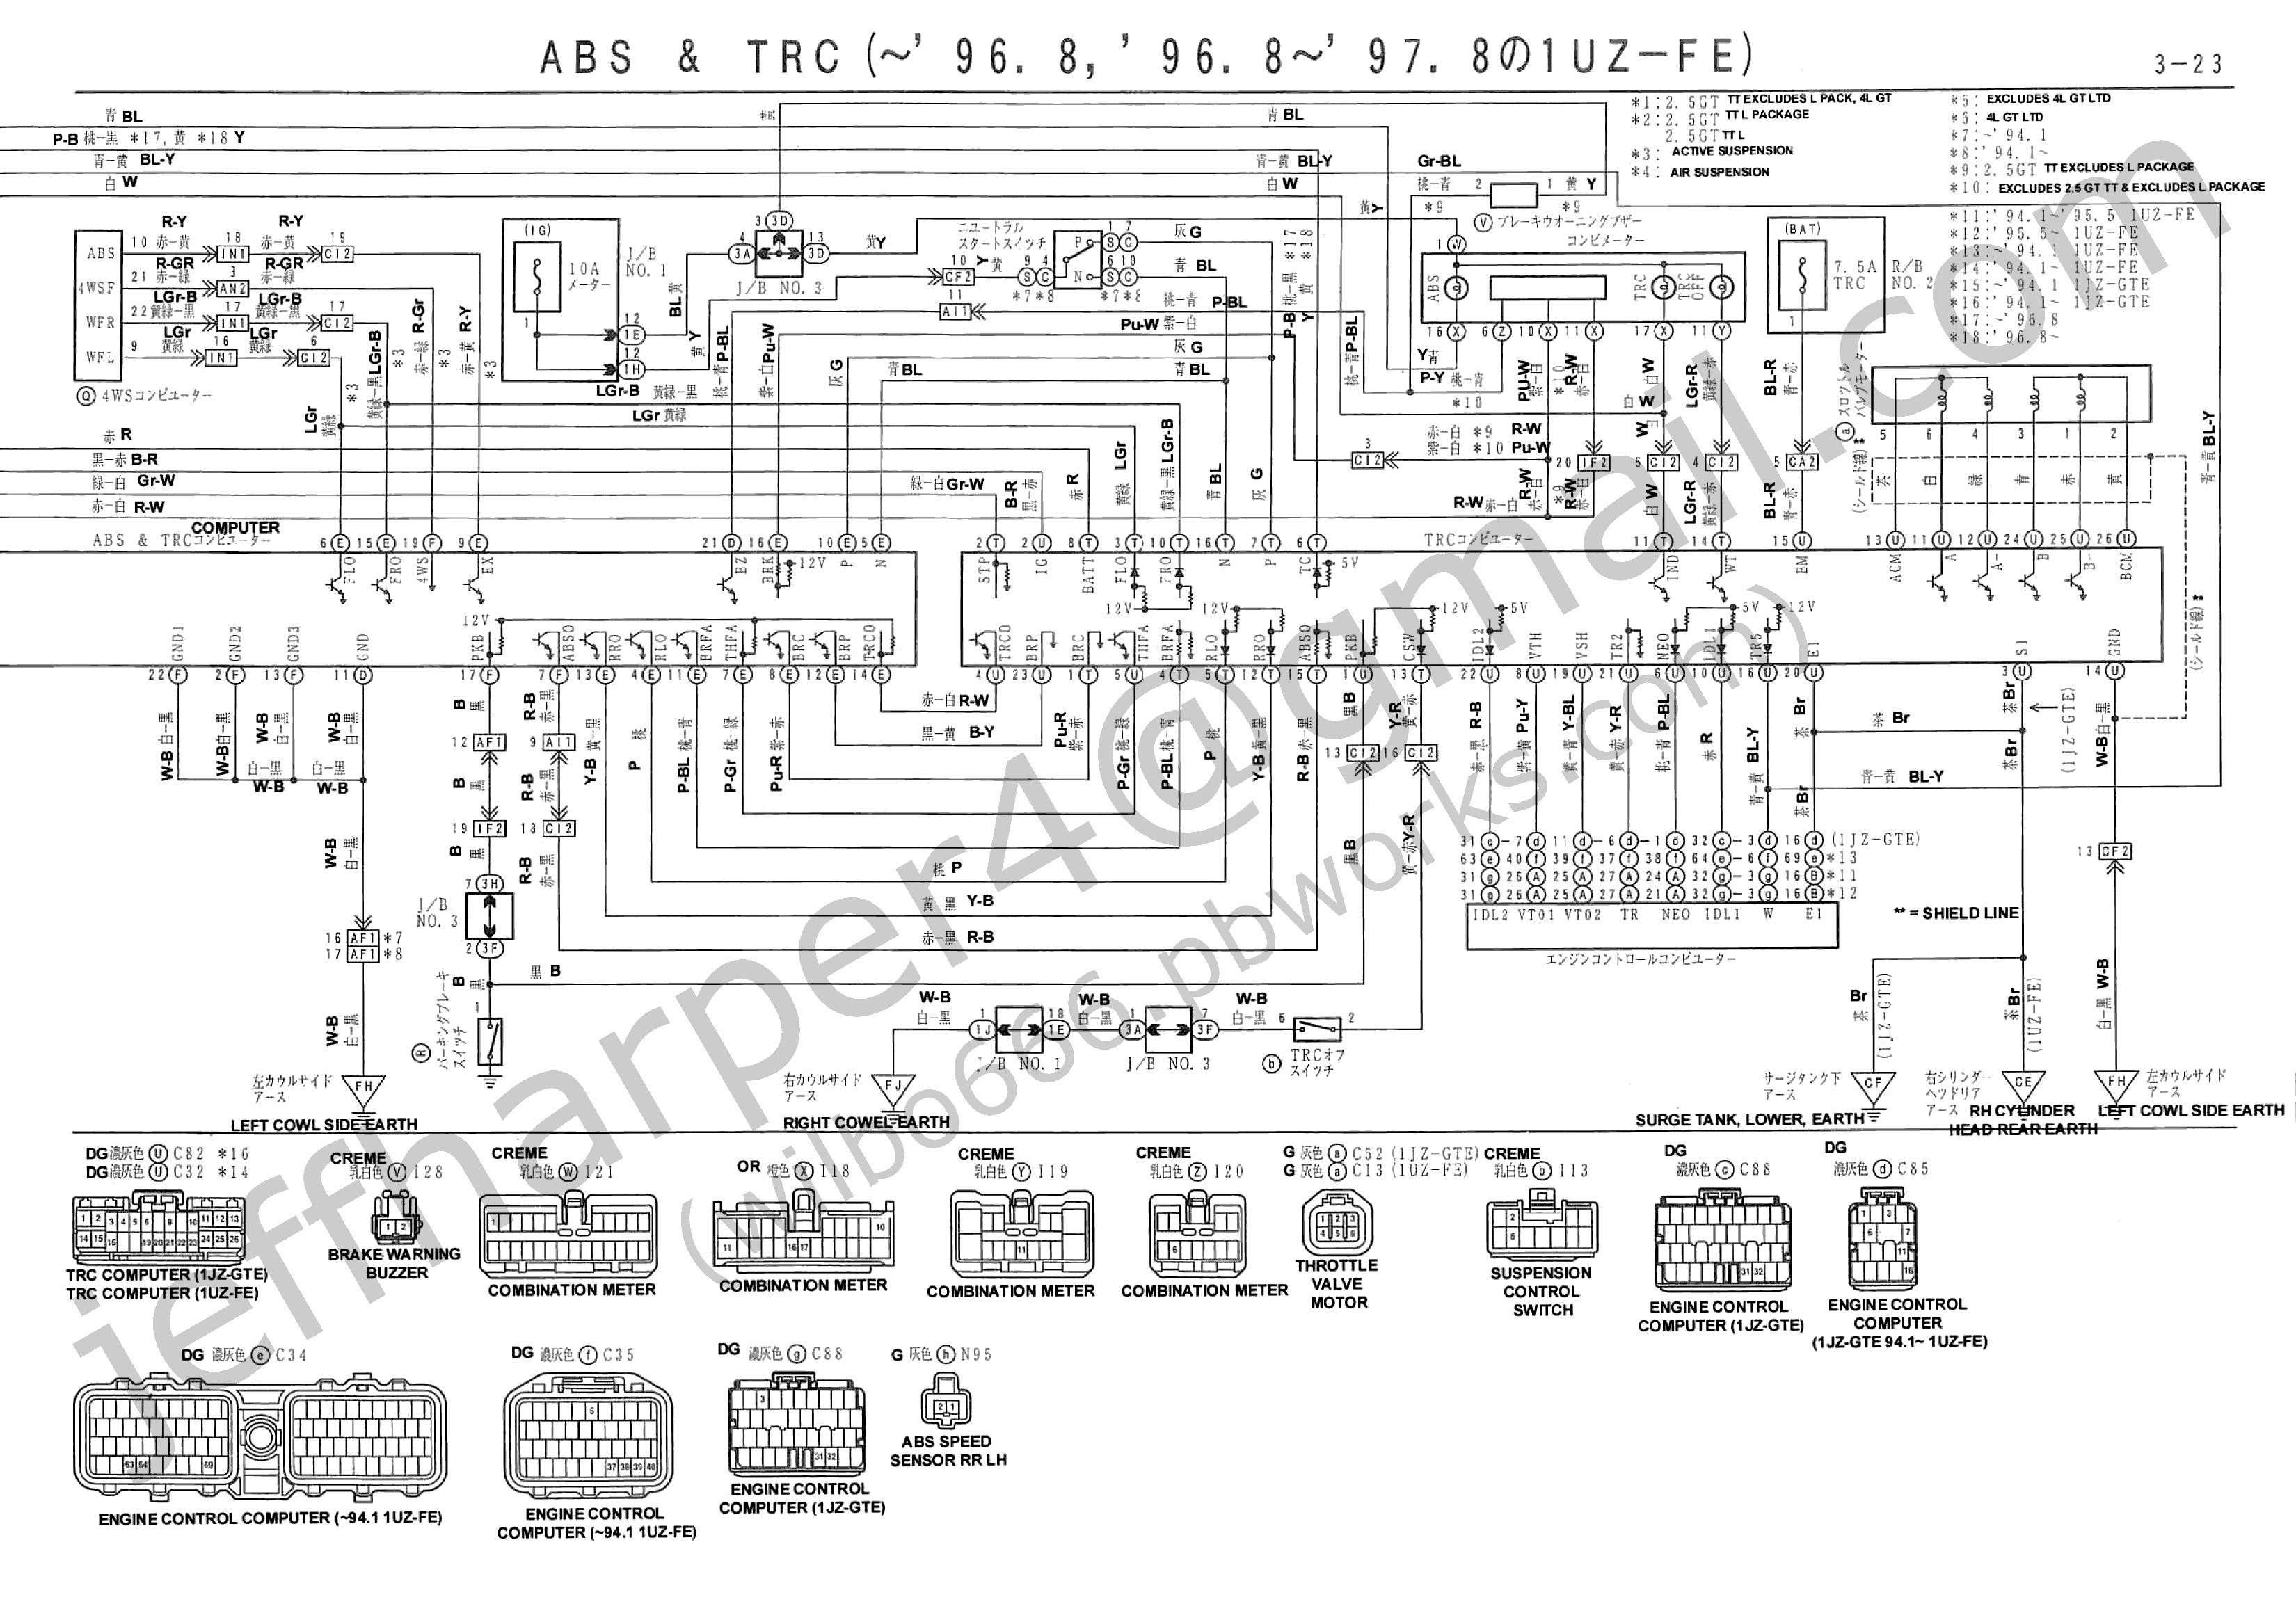 Toyota Camry 1998 Engine Diagram 7mge toyota 3 0 Engine Diagram Free Download Wiring Diagram Wiring Of Toyota Camry 1998 Engine Diagram